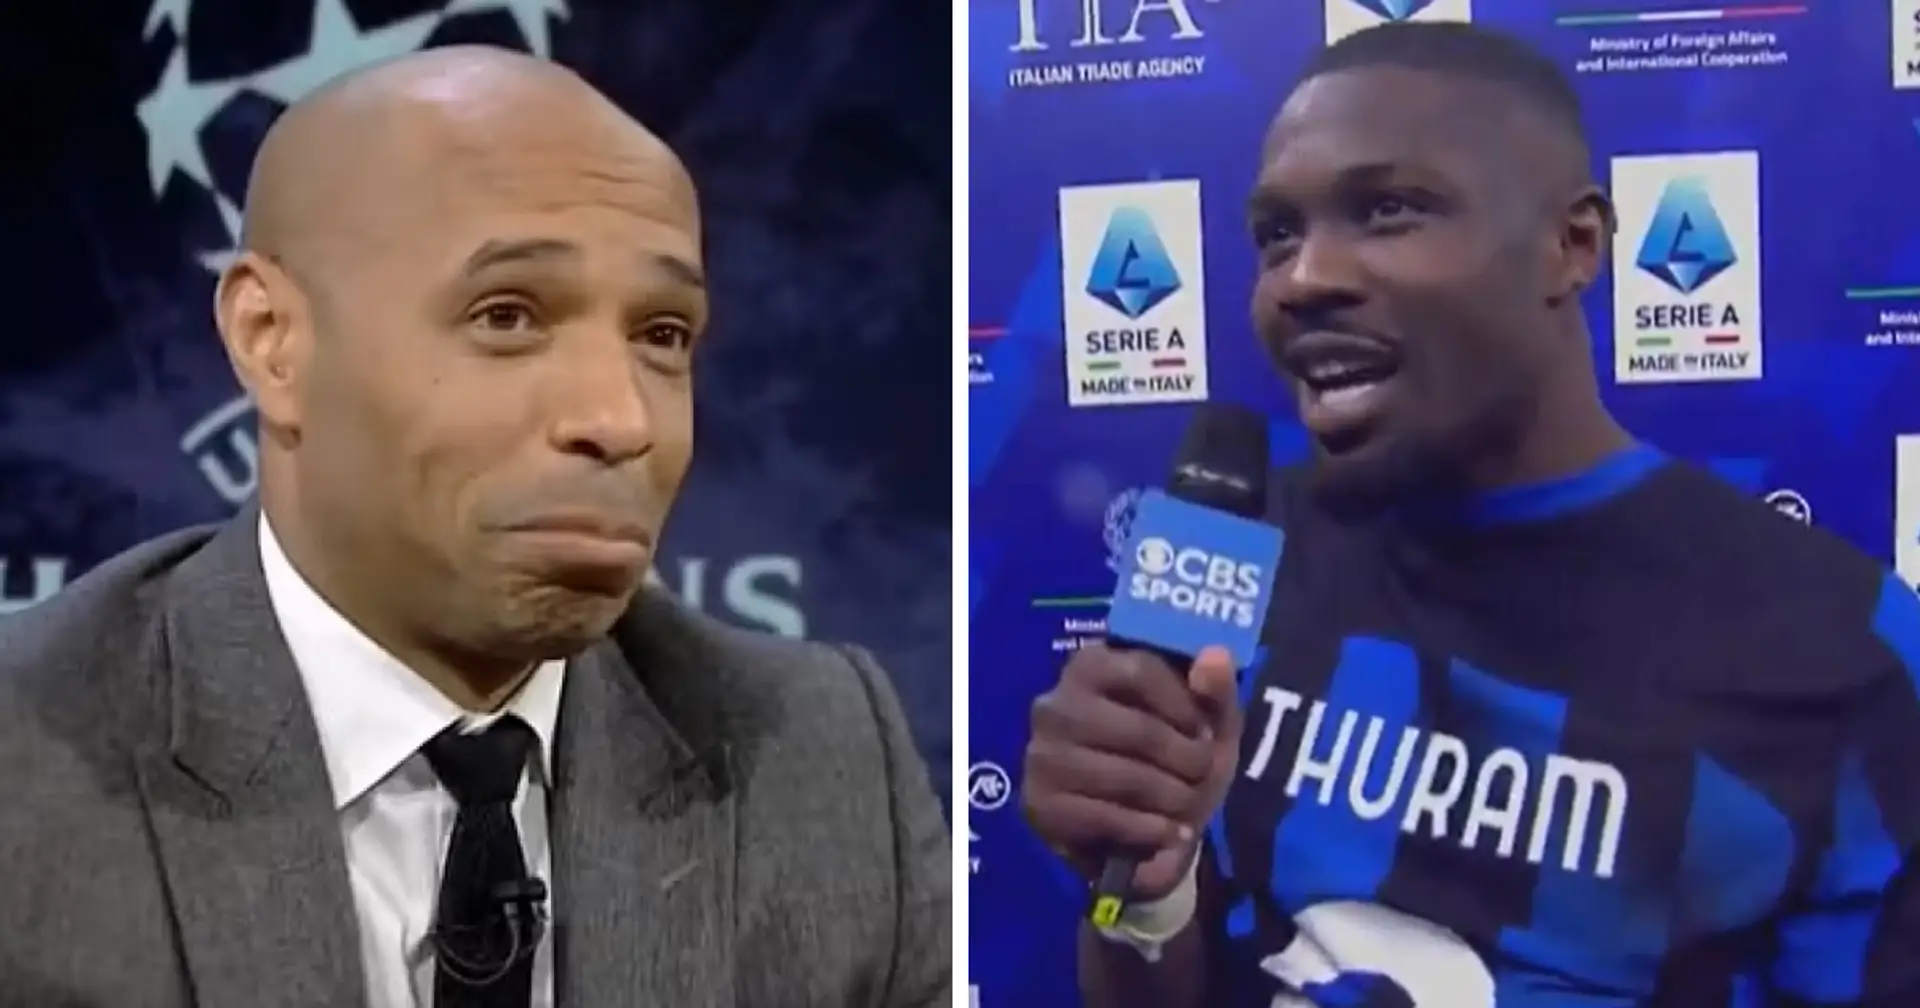 'He’s like my uncle that’s always here for me': Marcus Thuram pays touching tribute to Thierry Henry after defeating Milan